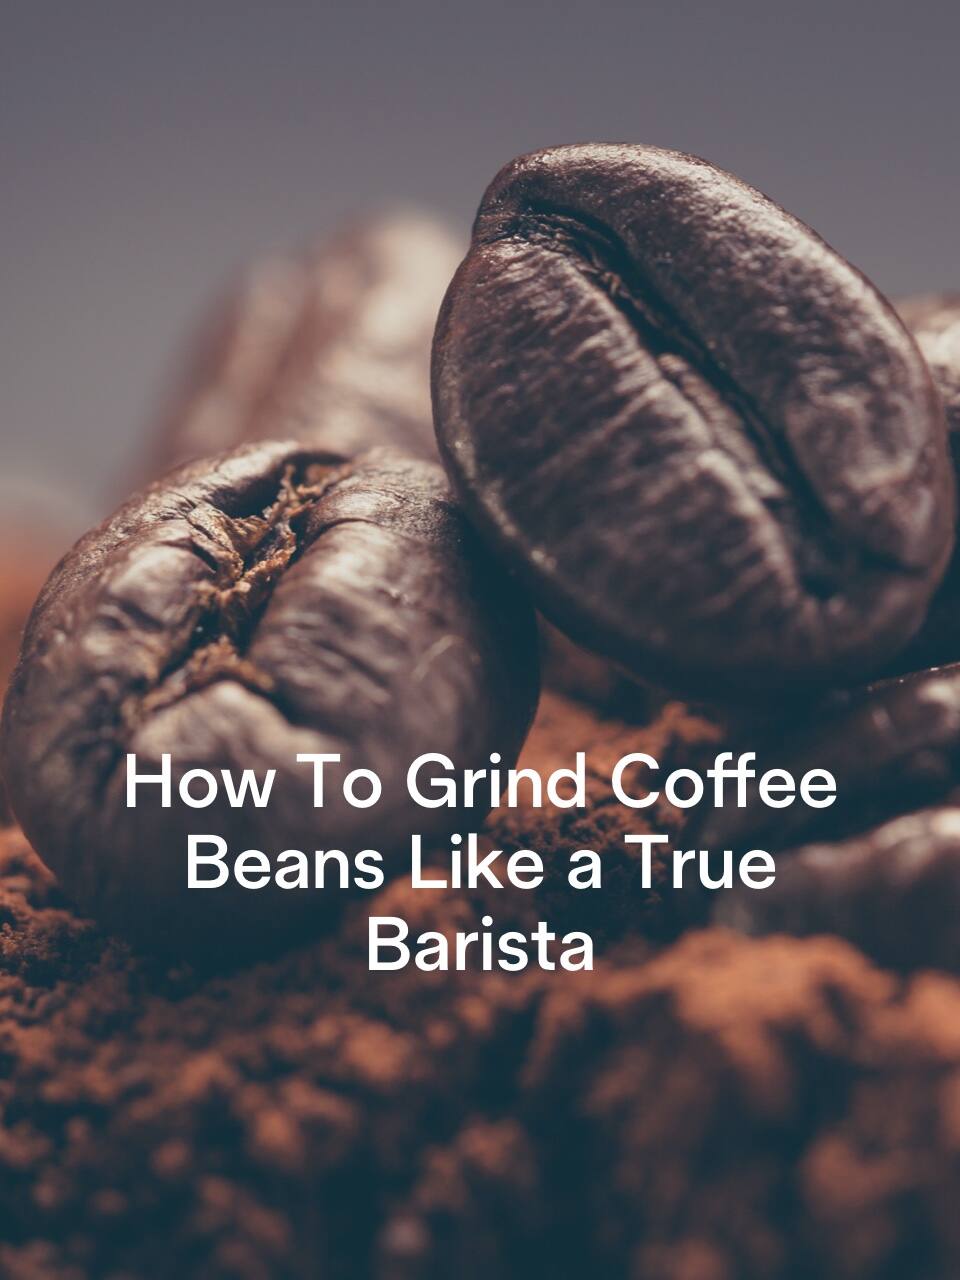 How To Grind Coffee Beans - Coffee Lounge